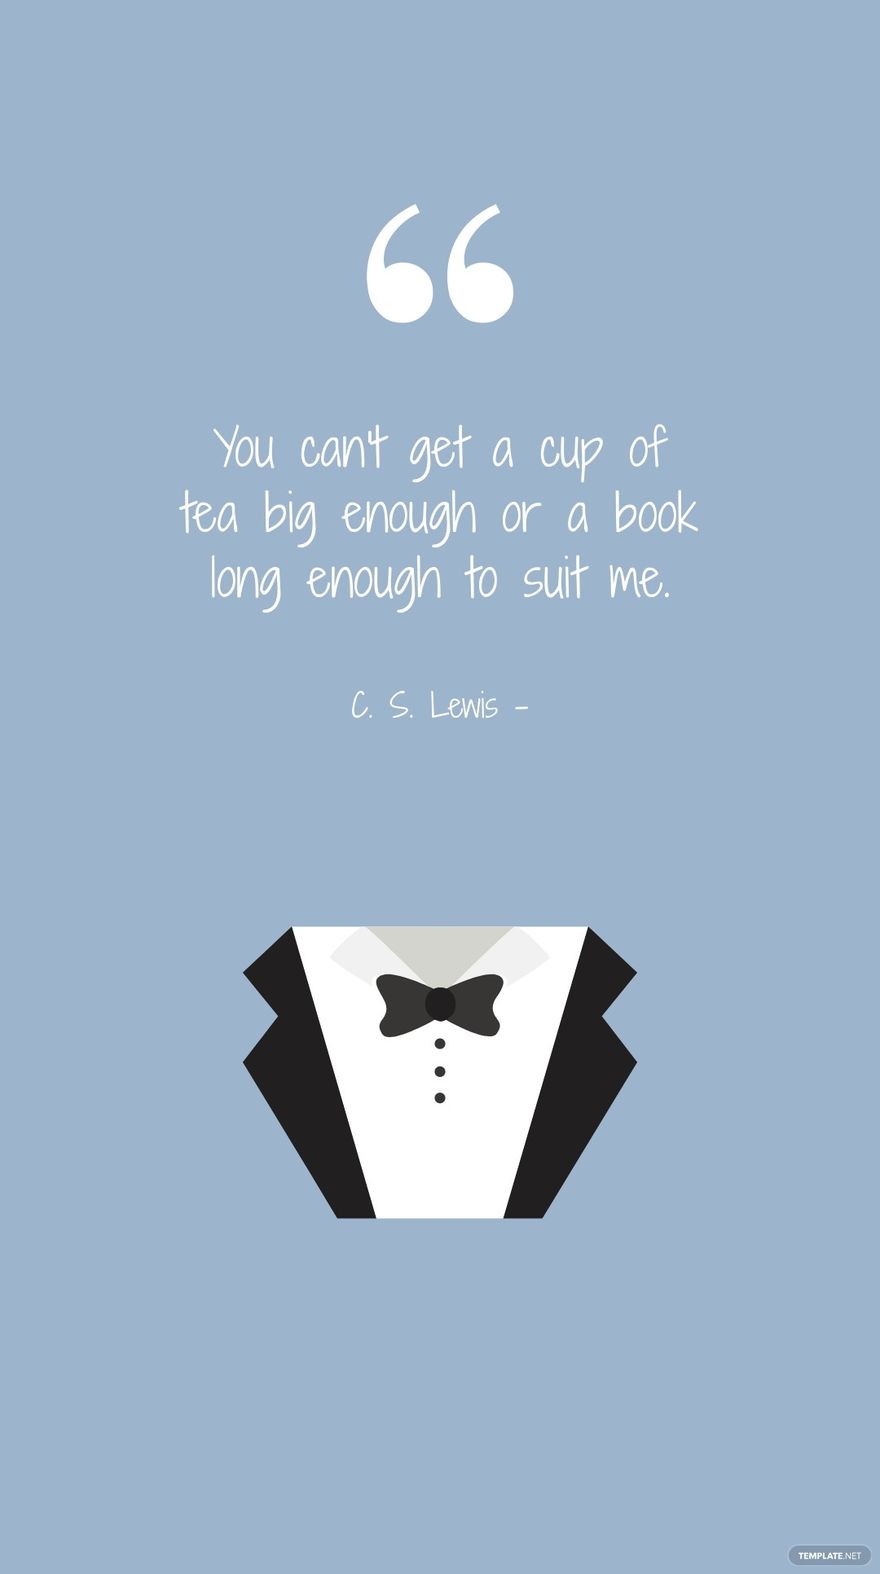 C. S. Lewis - You can't get a cup of tea big enough or a book long enough to suit me.